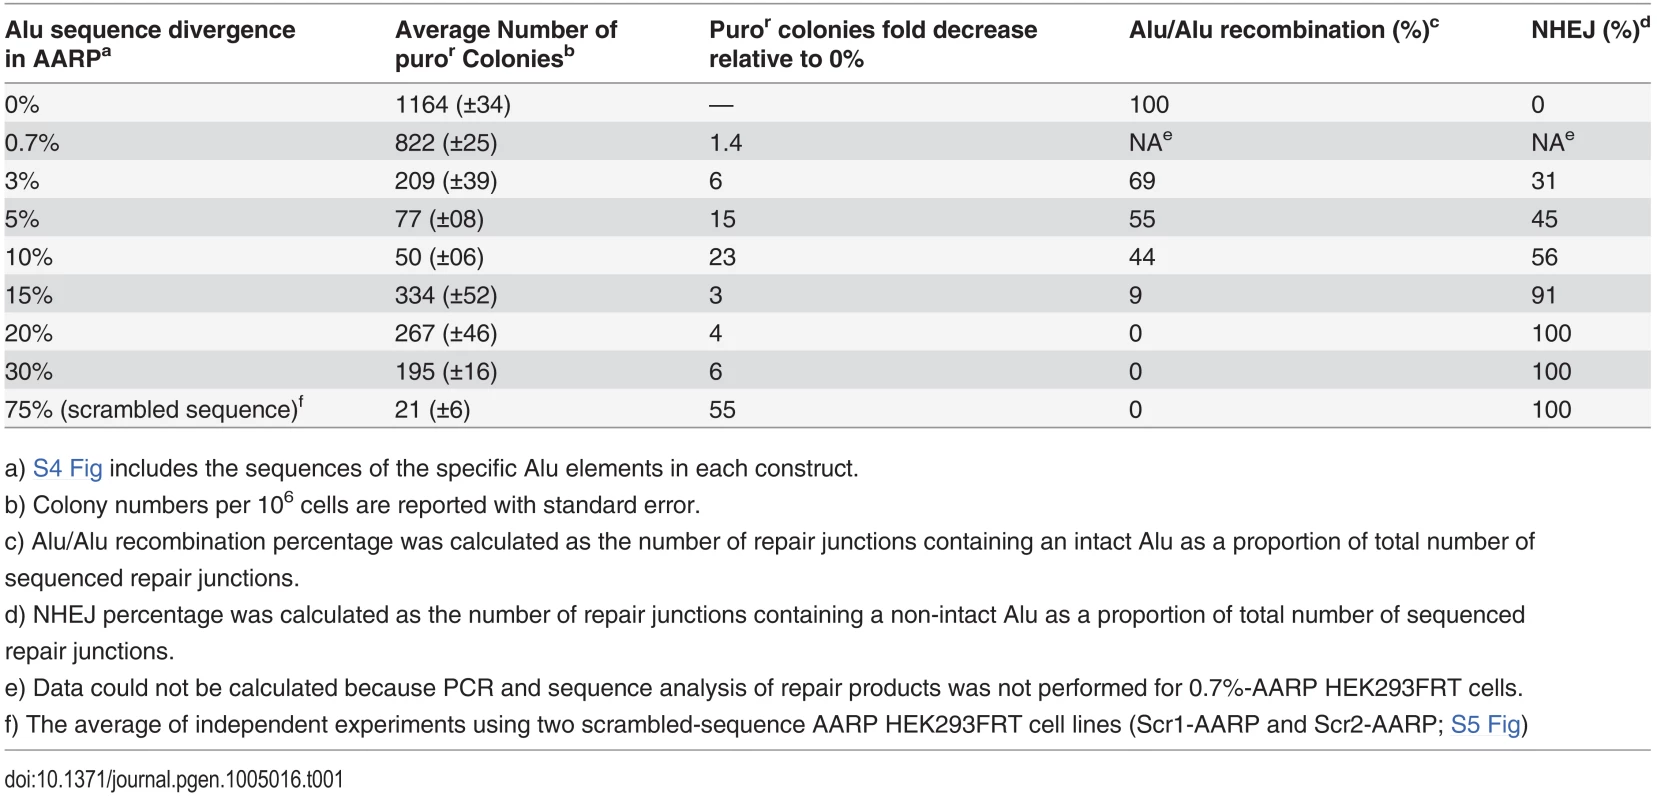 The average puromycin resistant (puro<sup>r</sup>) colonies and repair pathway contribution for AARP HEK293FRT cells.